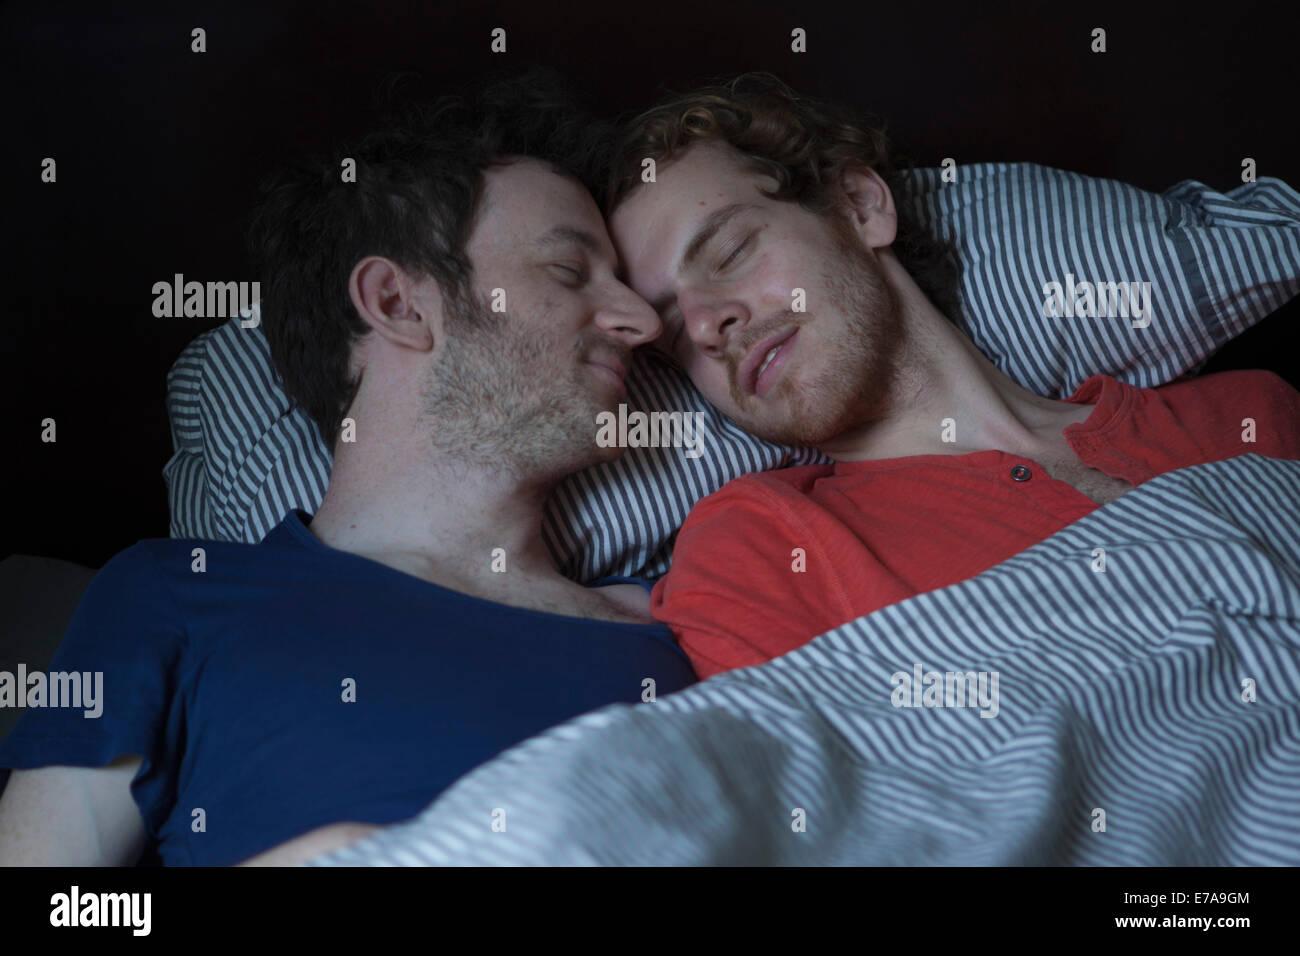 Relaxed young gay couple sleeping in bed Stock Photo